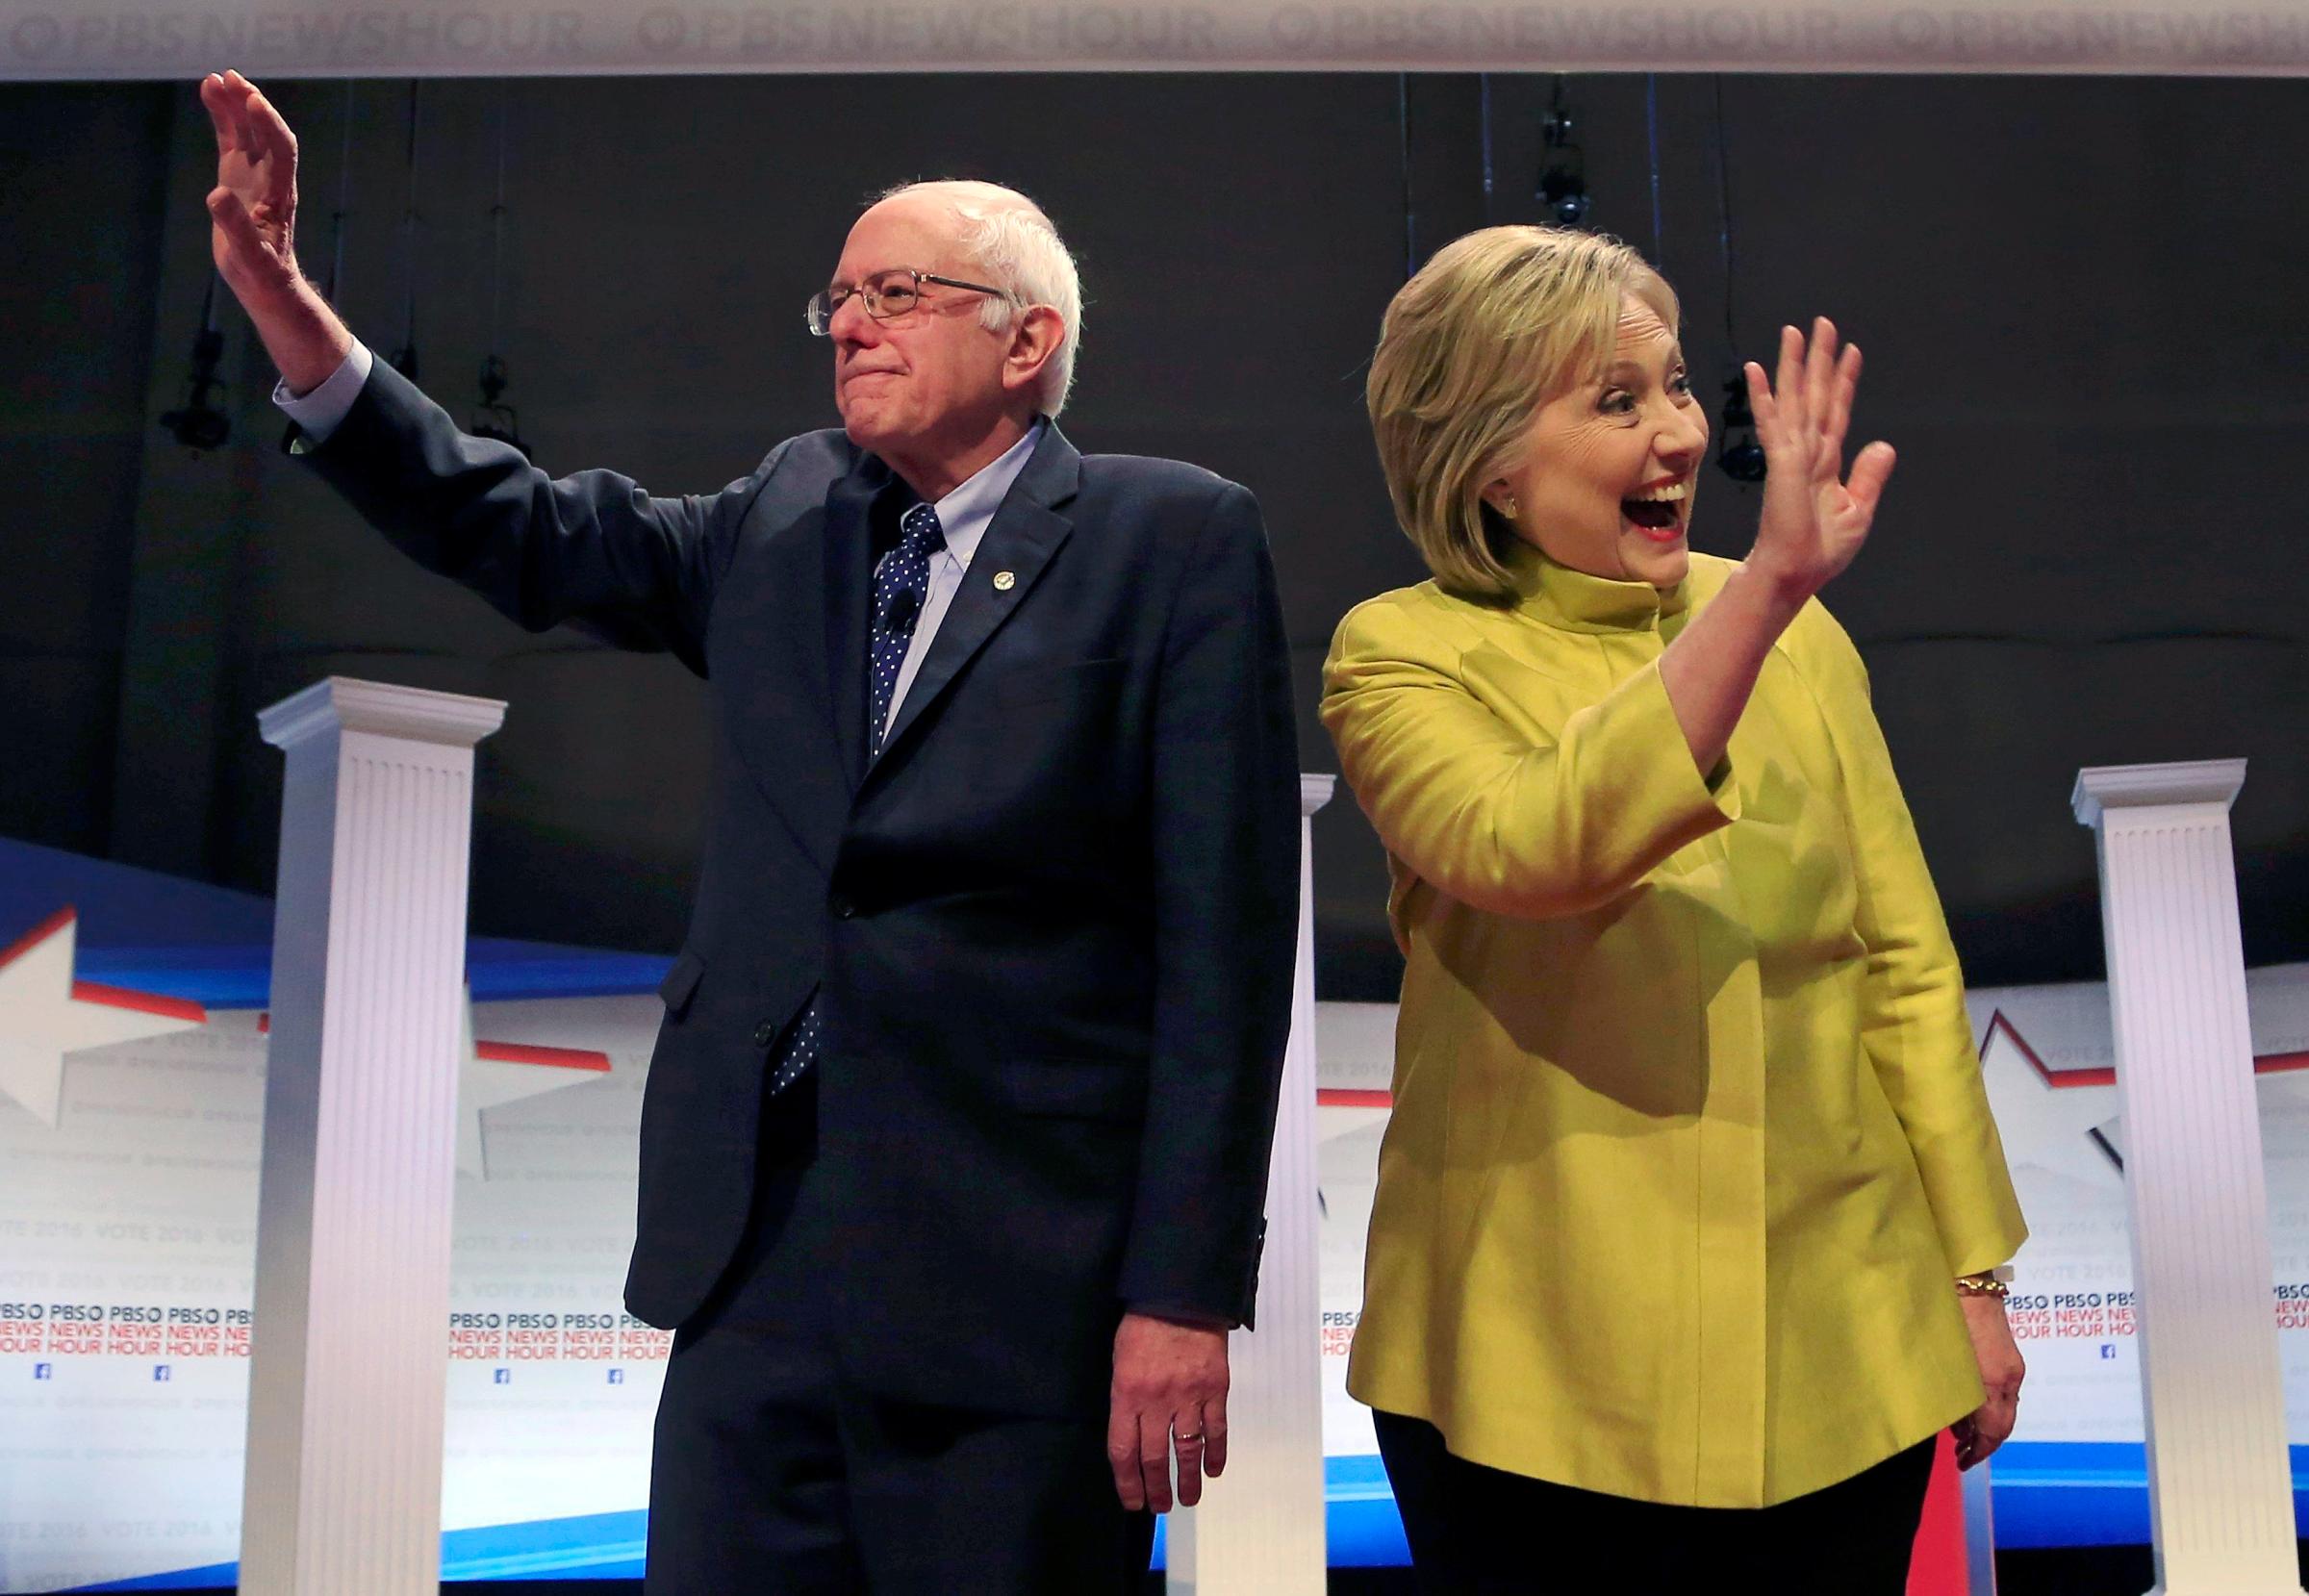 Democratic. presidential candidates Senator Bernie Sanders and former Secretary of State Hillary Clinton on stage at a debate in Milwaukee on Feb. 11, 2016.